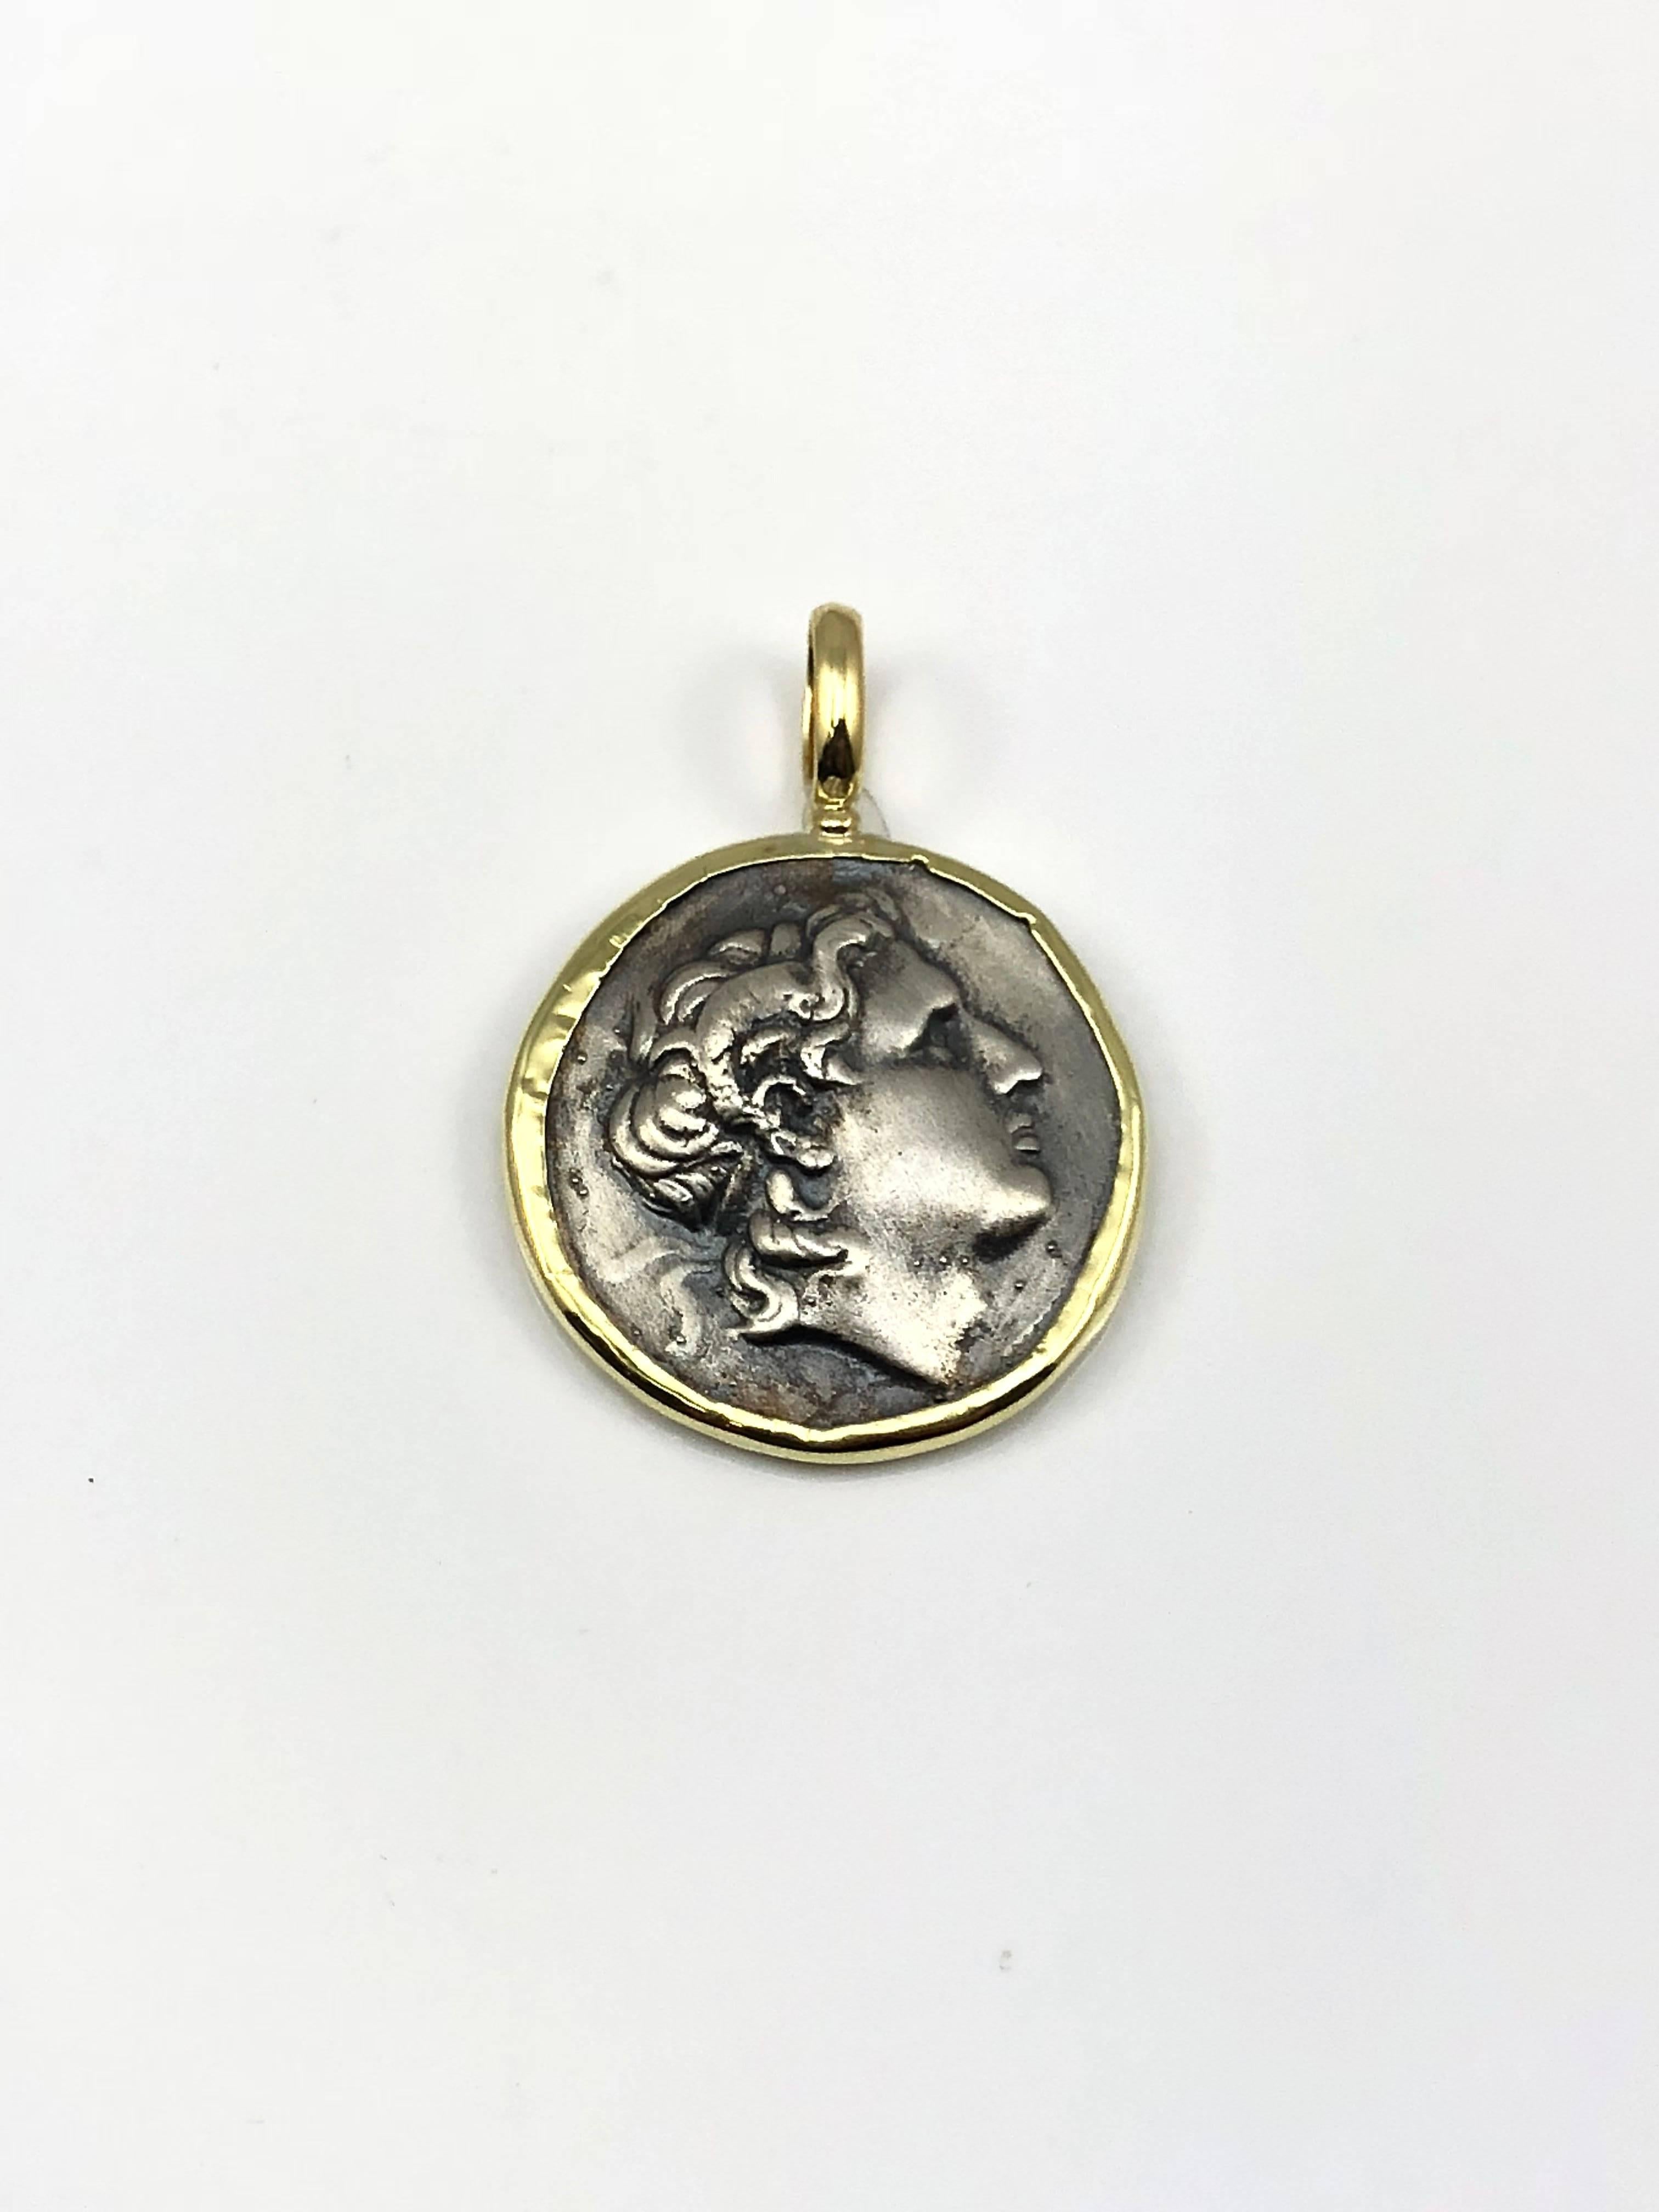 S.Georgios designer 18 Karat Yellow Gold handmade Pendant Necklace featuring a replica of an Ancient Greek Alexander The Great Coin in Silver 925. The coin has a beautiful reverse side and can be worn both ways and the rim and hook of the pendant